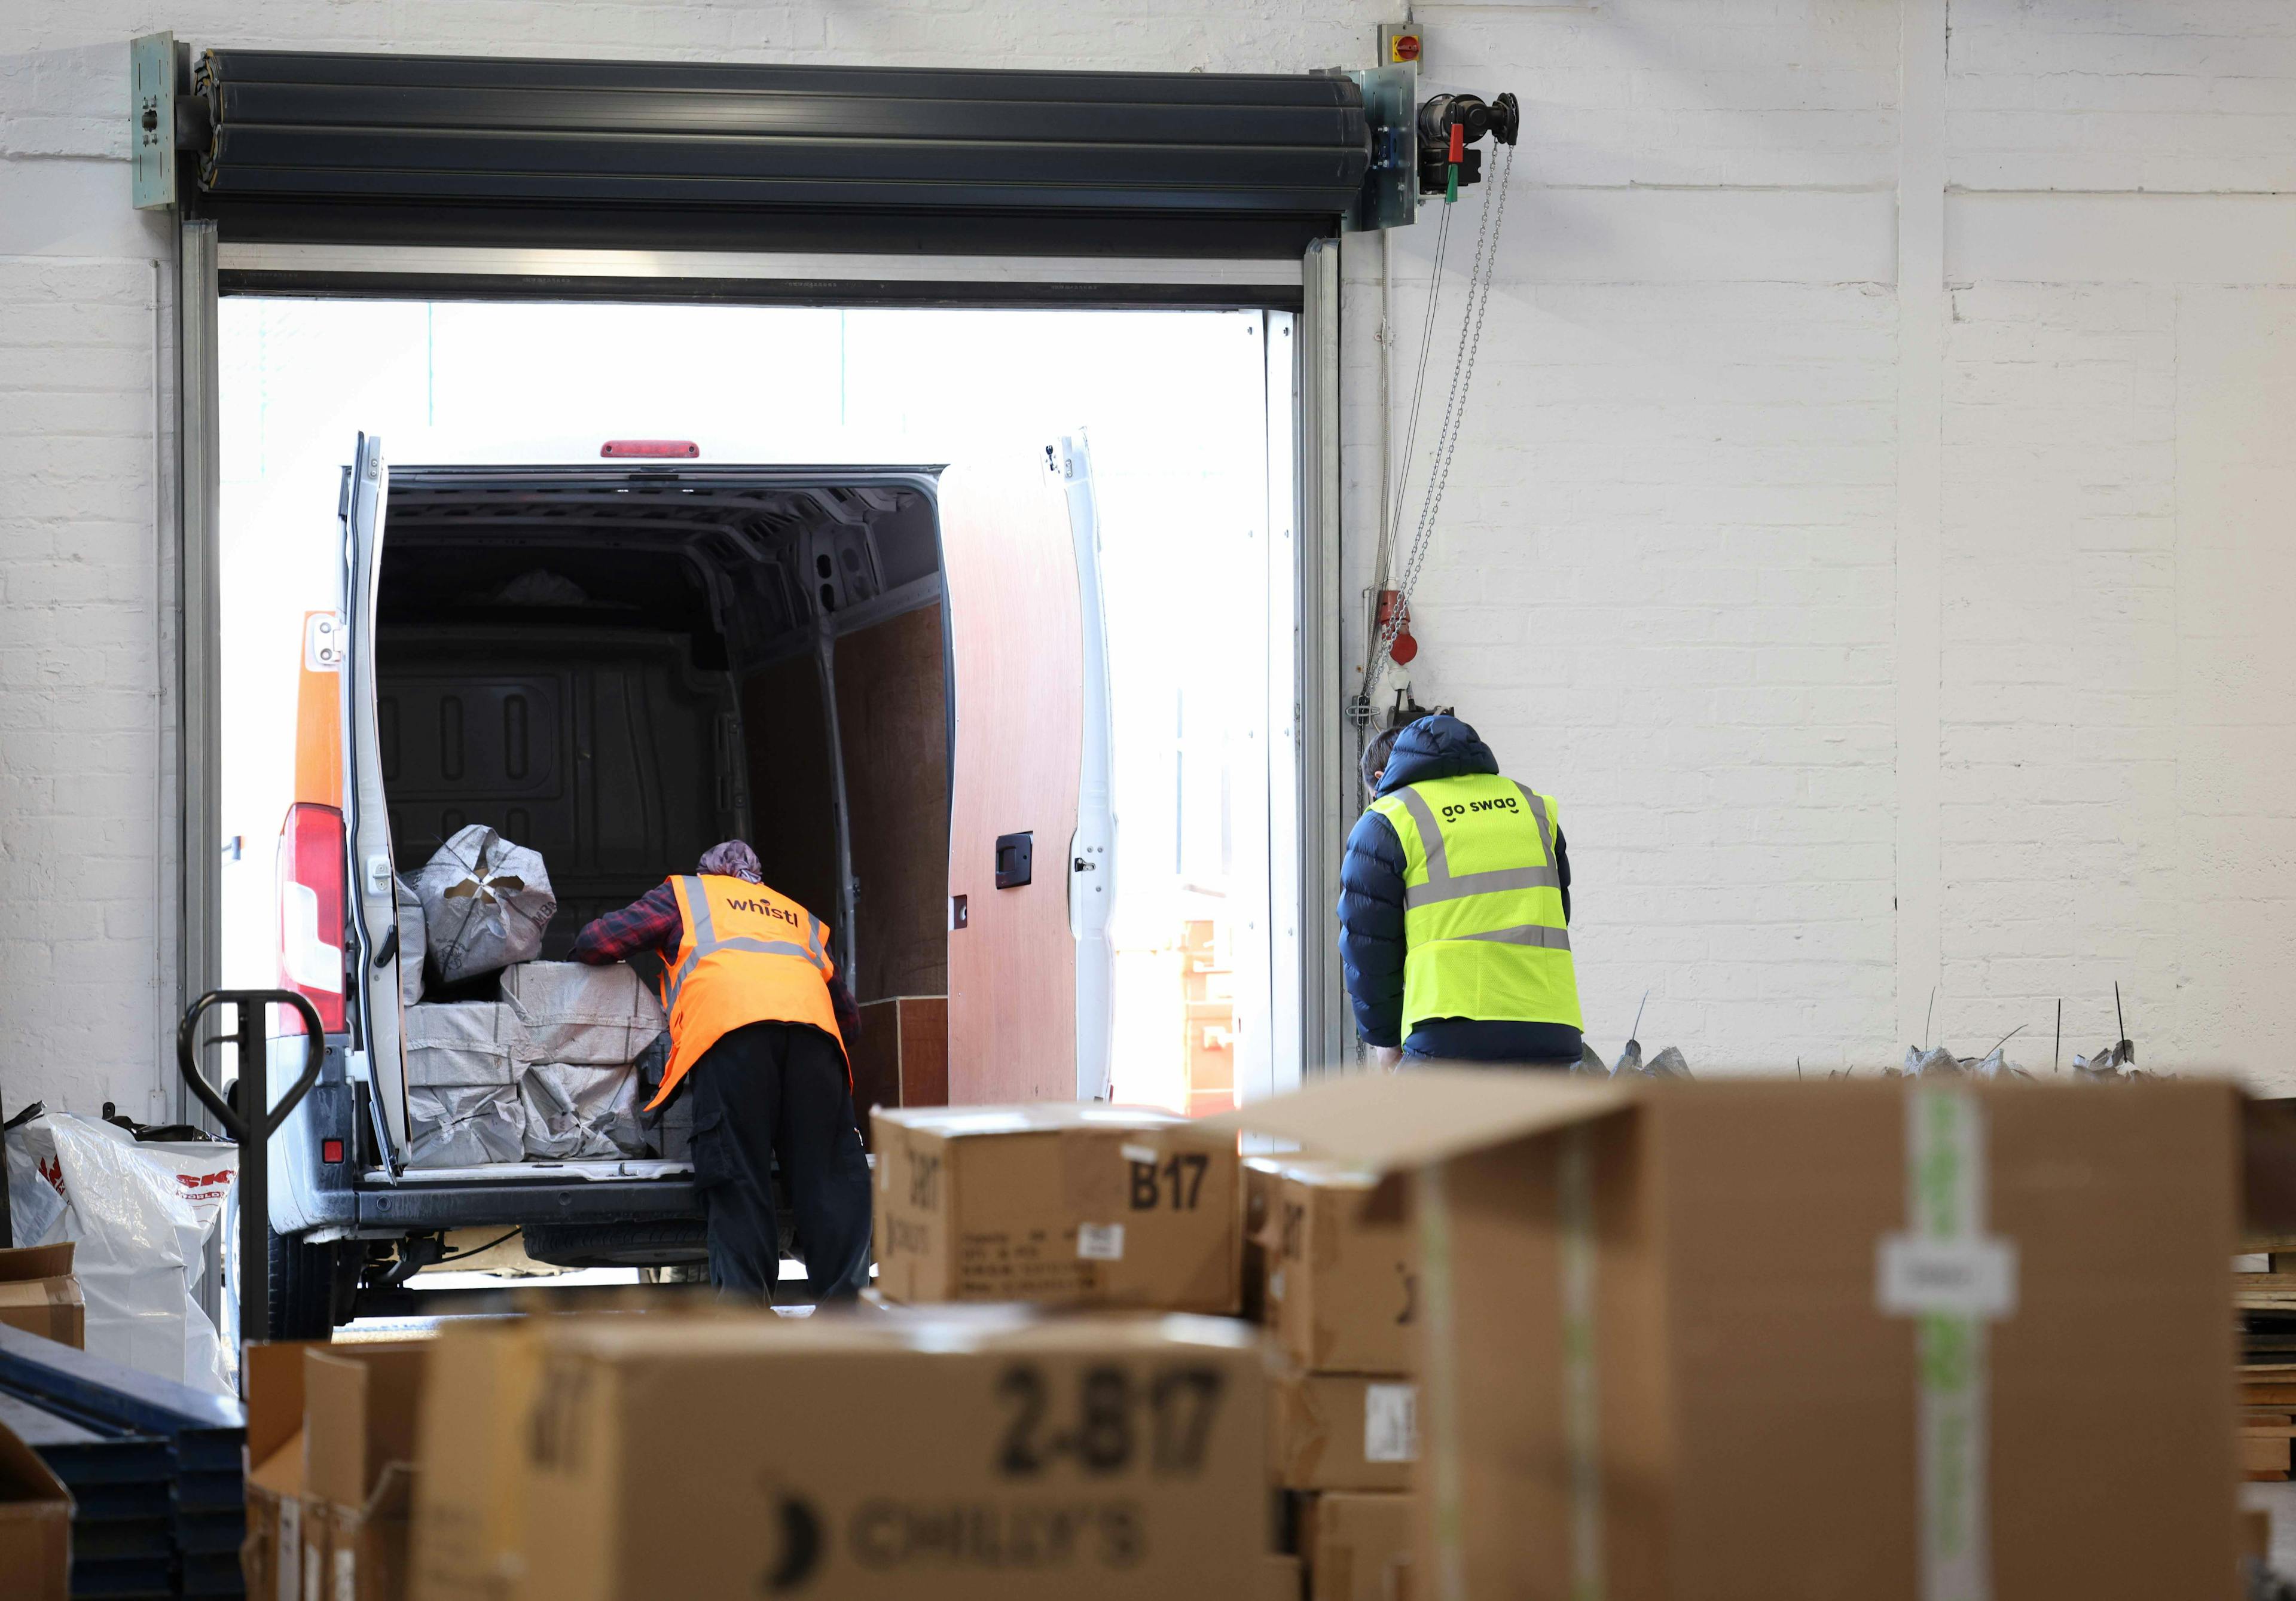 Photograph of packages being unloaded in a warehouse